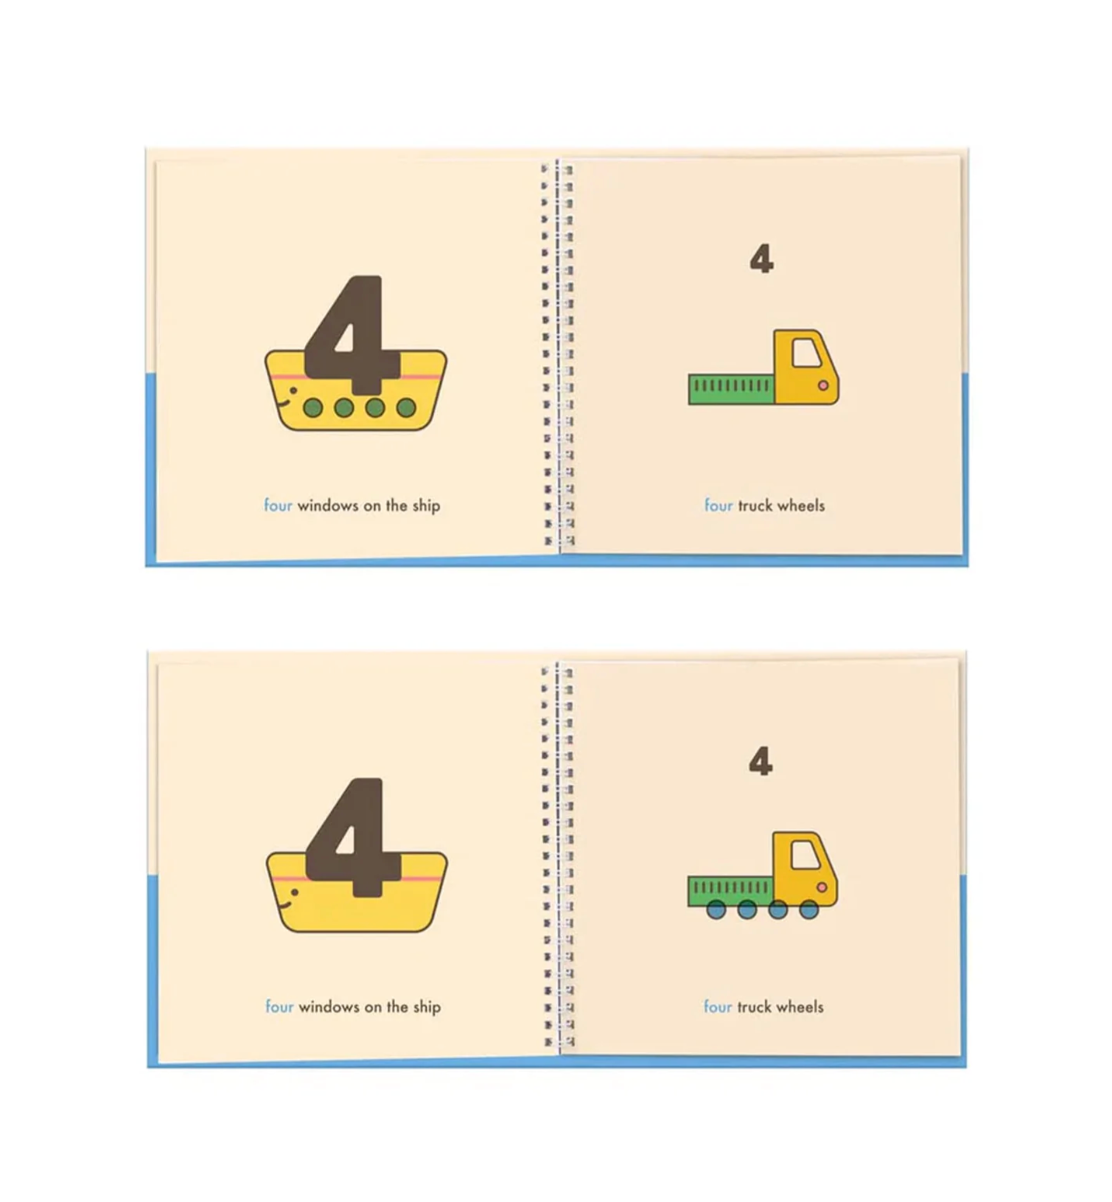 OIOIOOI NUMBERS BOOK